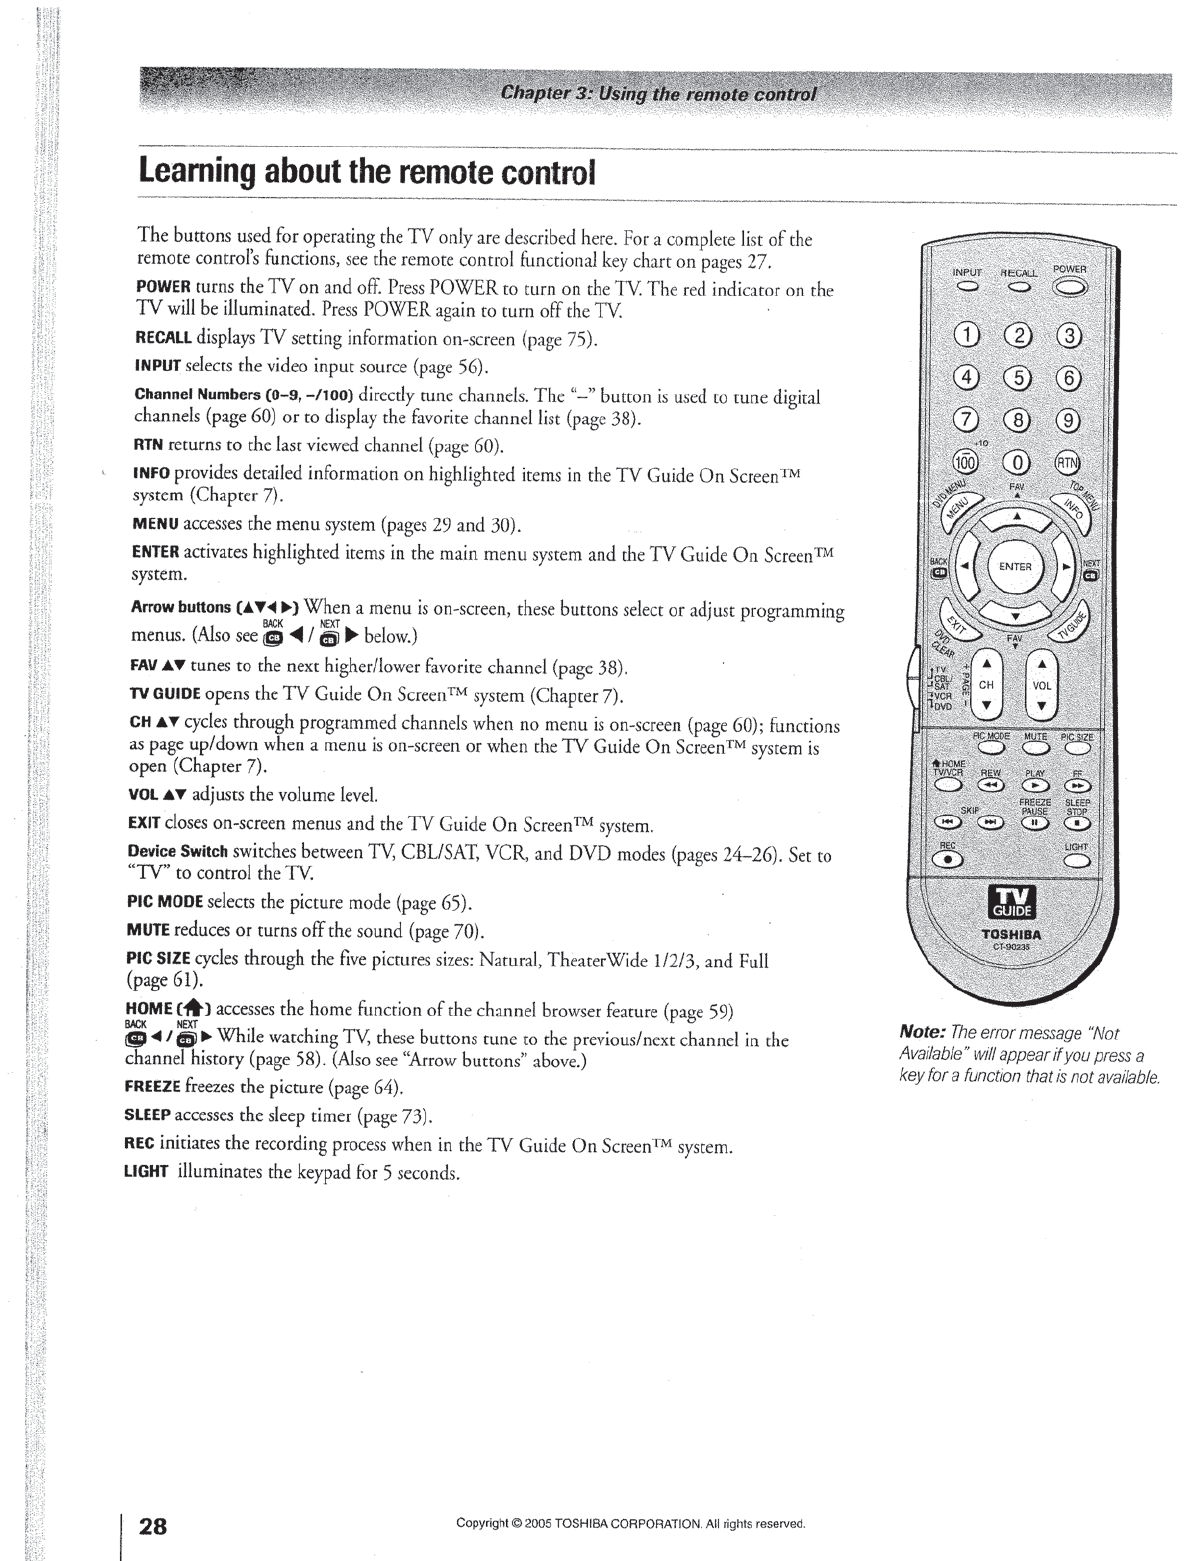 Page 28 of Toshiba Flat Panel Television 32HL95 User Guide